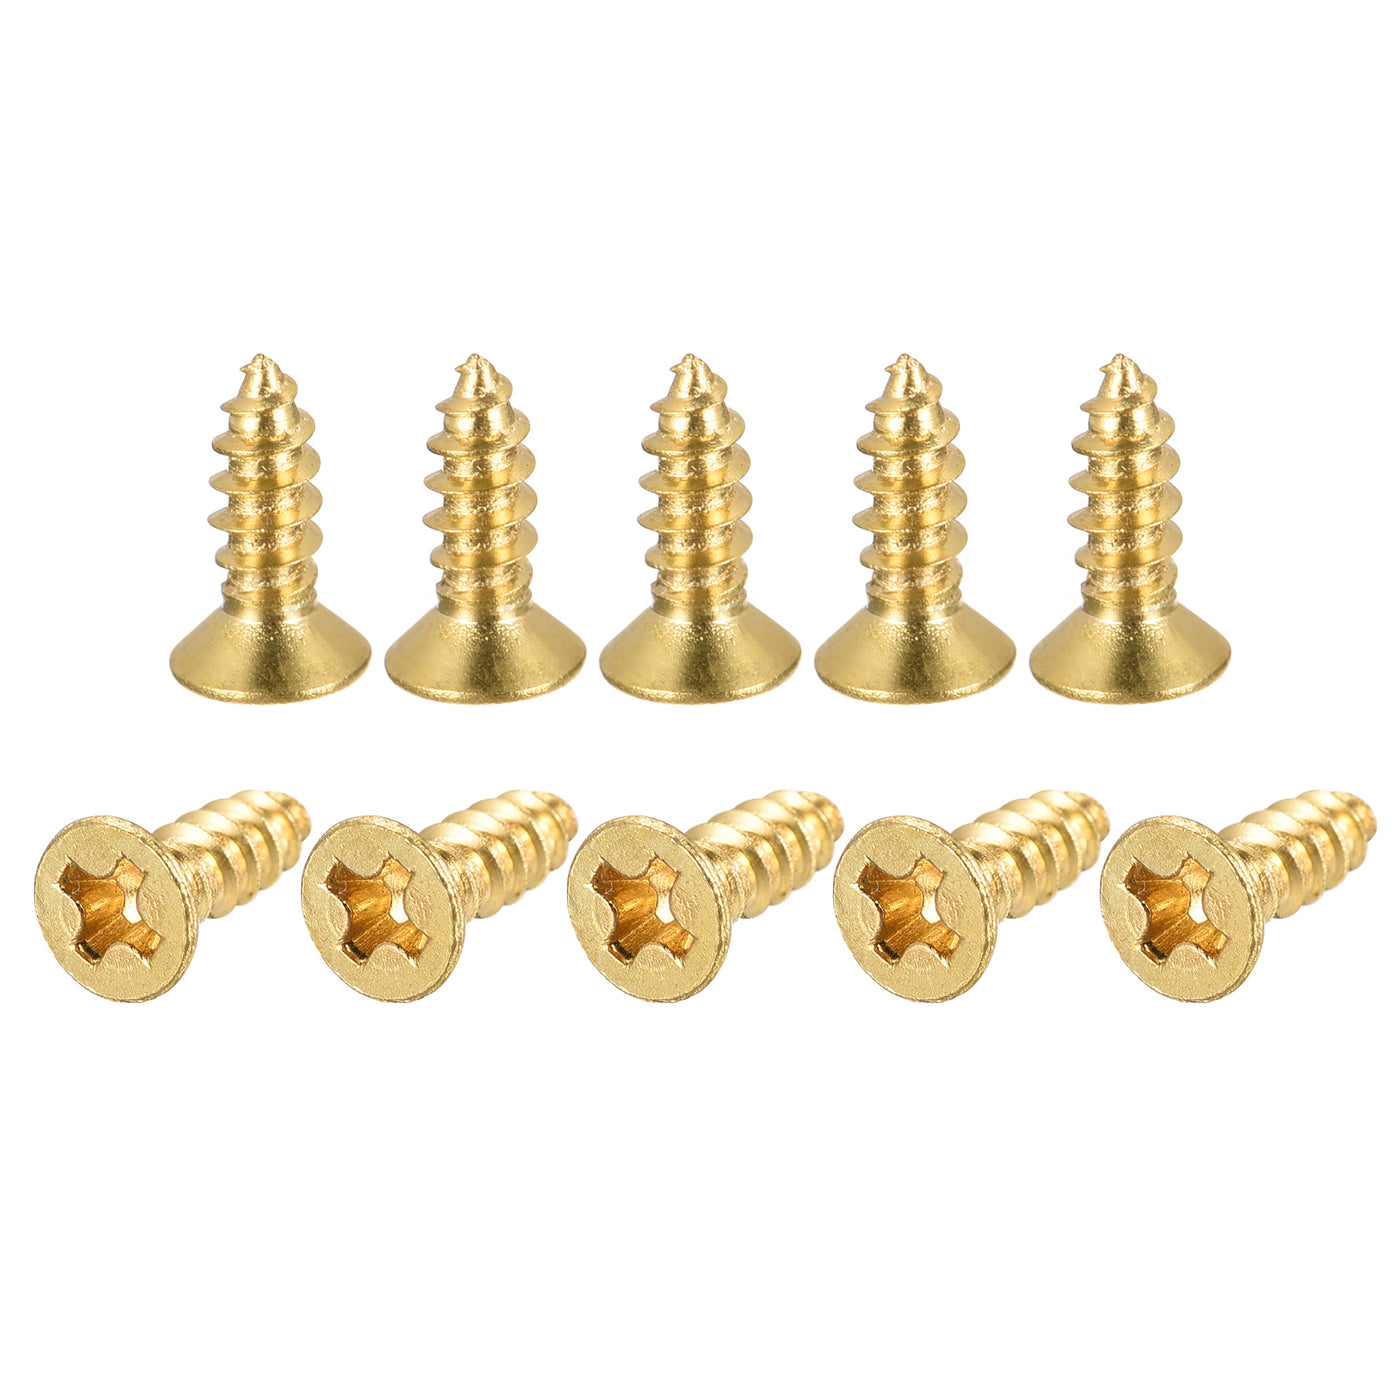 uxcell Uxcell Brass Wood Screws, M3.5x12mm Phillips Flat Head Self Tapping Connector for Door, Cabinet, Wooden Furniture 100Pcs